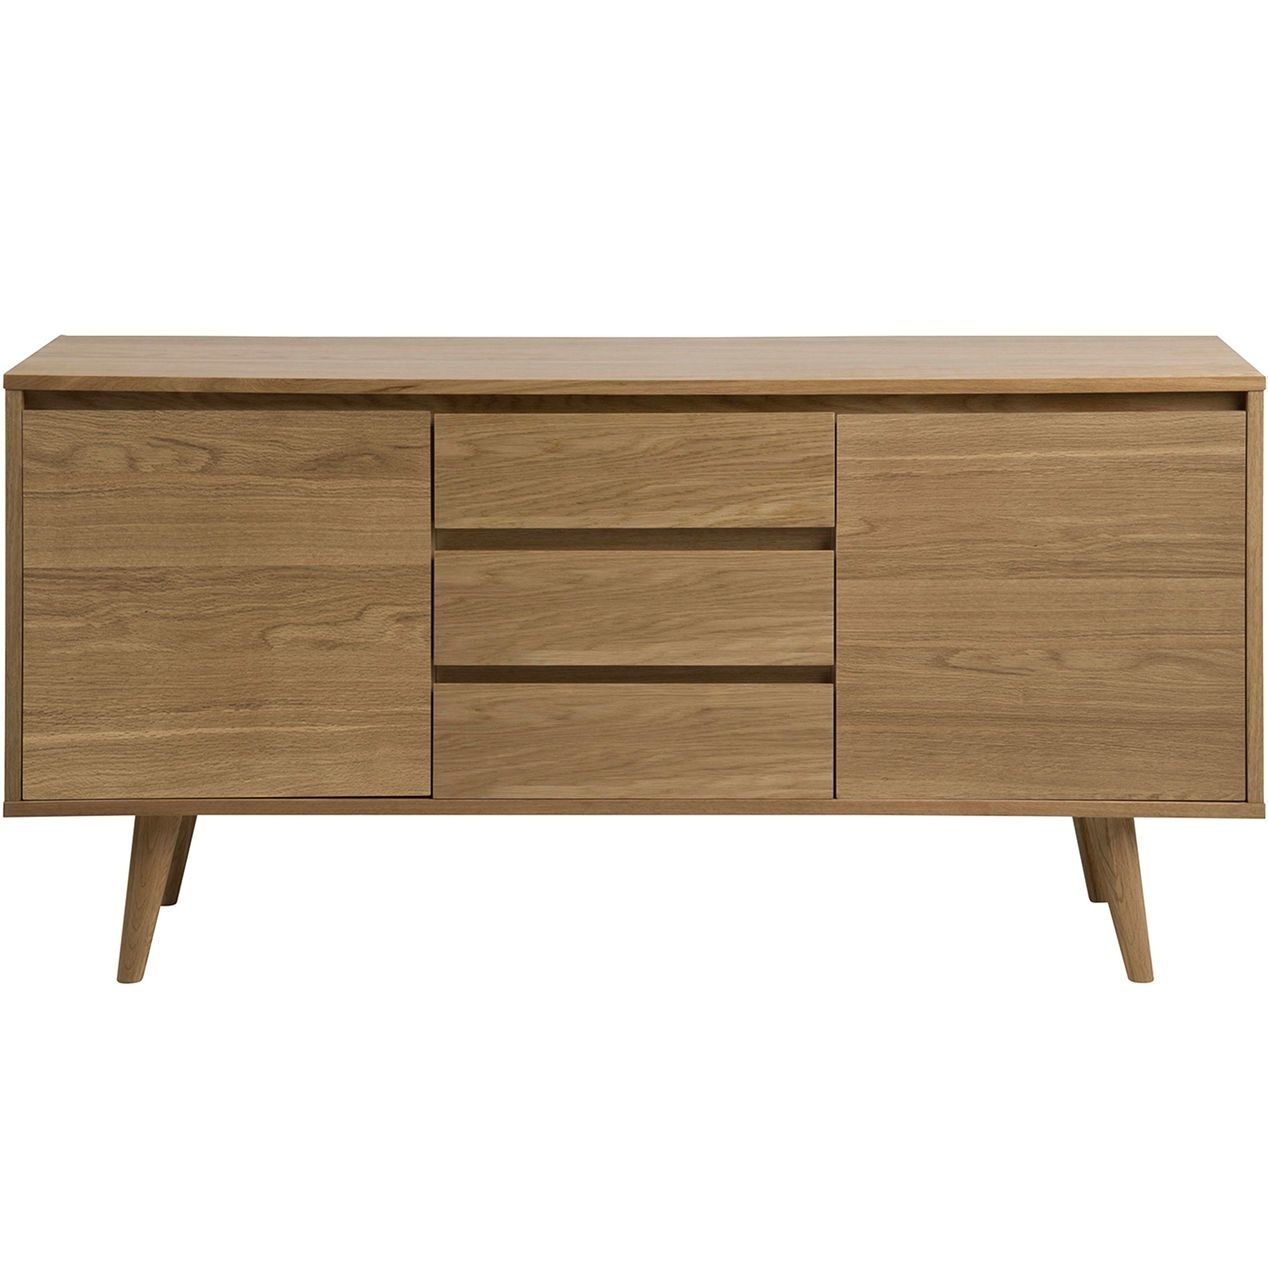 Nagano Sideboard Solid Oak Chest | Dining Room | Pinterest | Solid With Regard To Lockwood Sideboards (View 14 of 30)